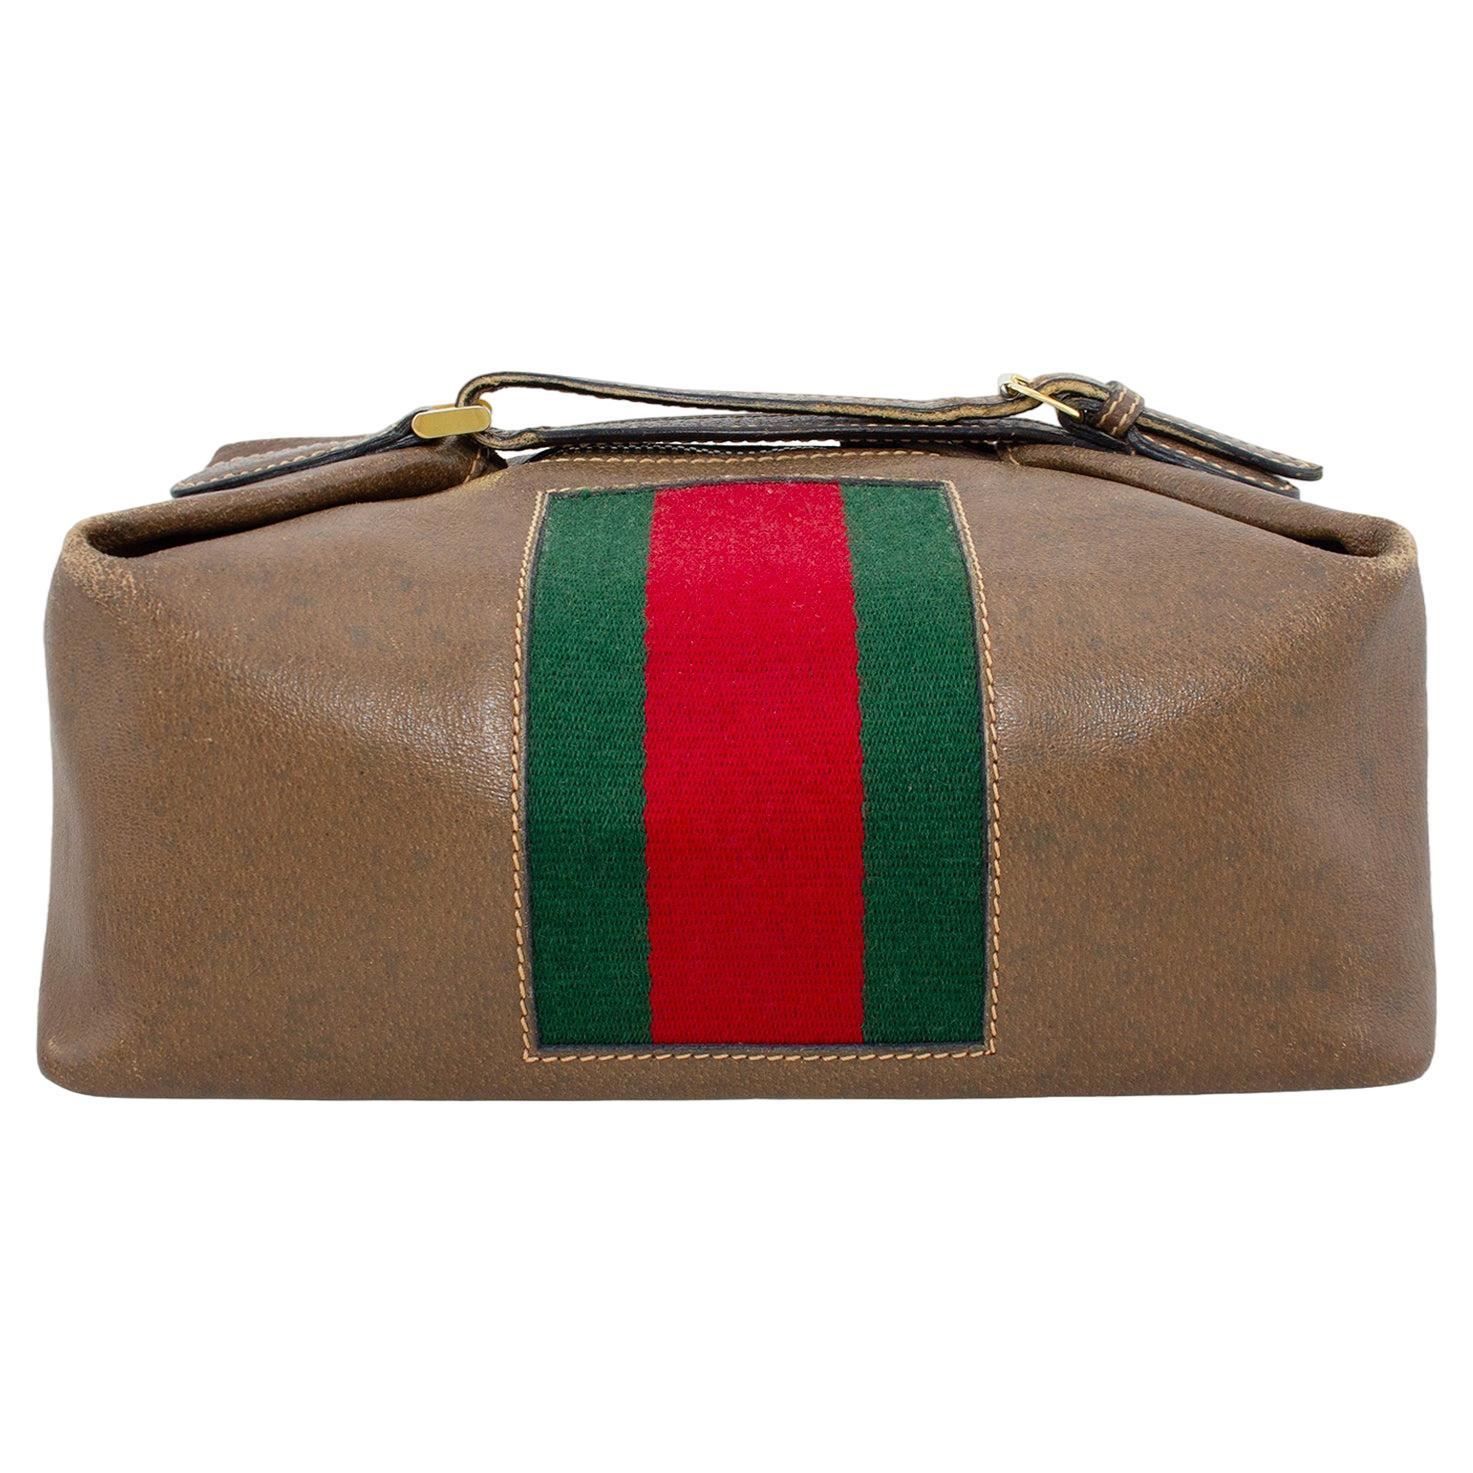 Do Gucci bags hold their value?